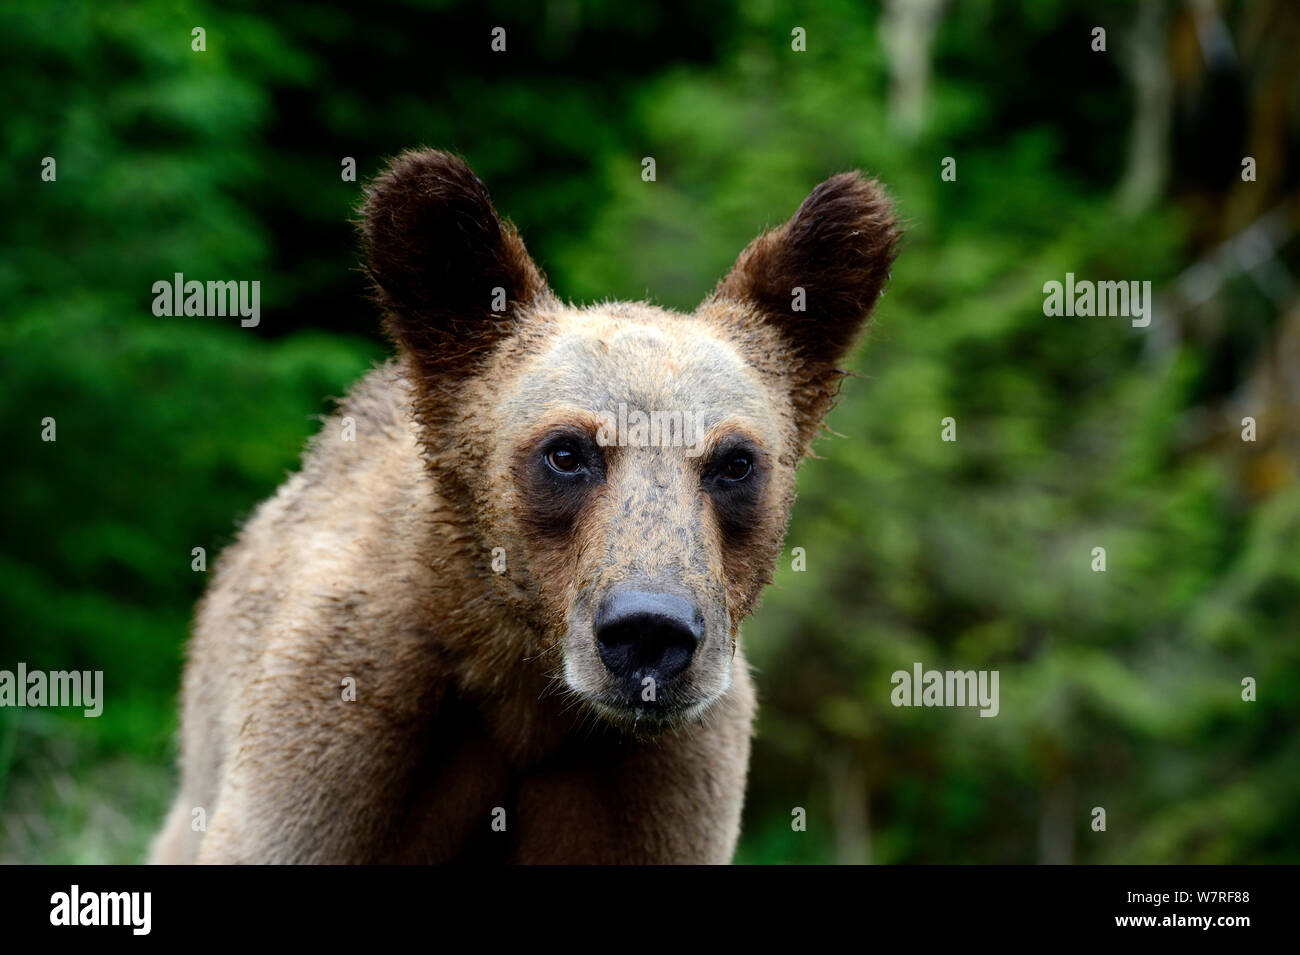 Head portrait of a Grizzly bear cub (Ursus arctos horribilis) with ears pricked up, Khutzeymateen Grizzly Bear Sanctuary, British Columbia, Canada, June. Stock Photo